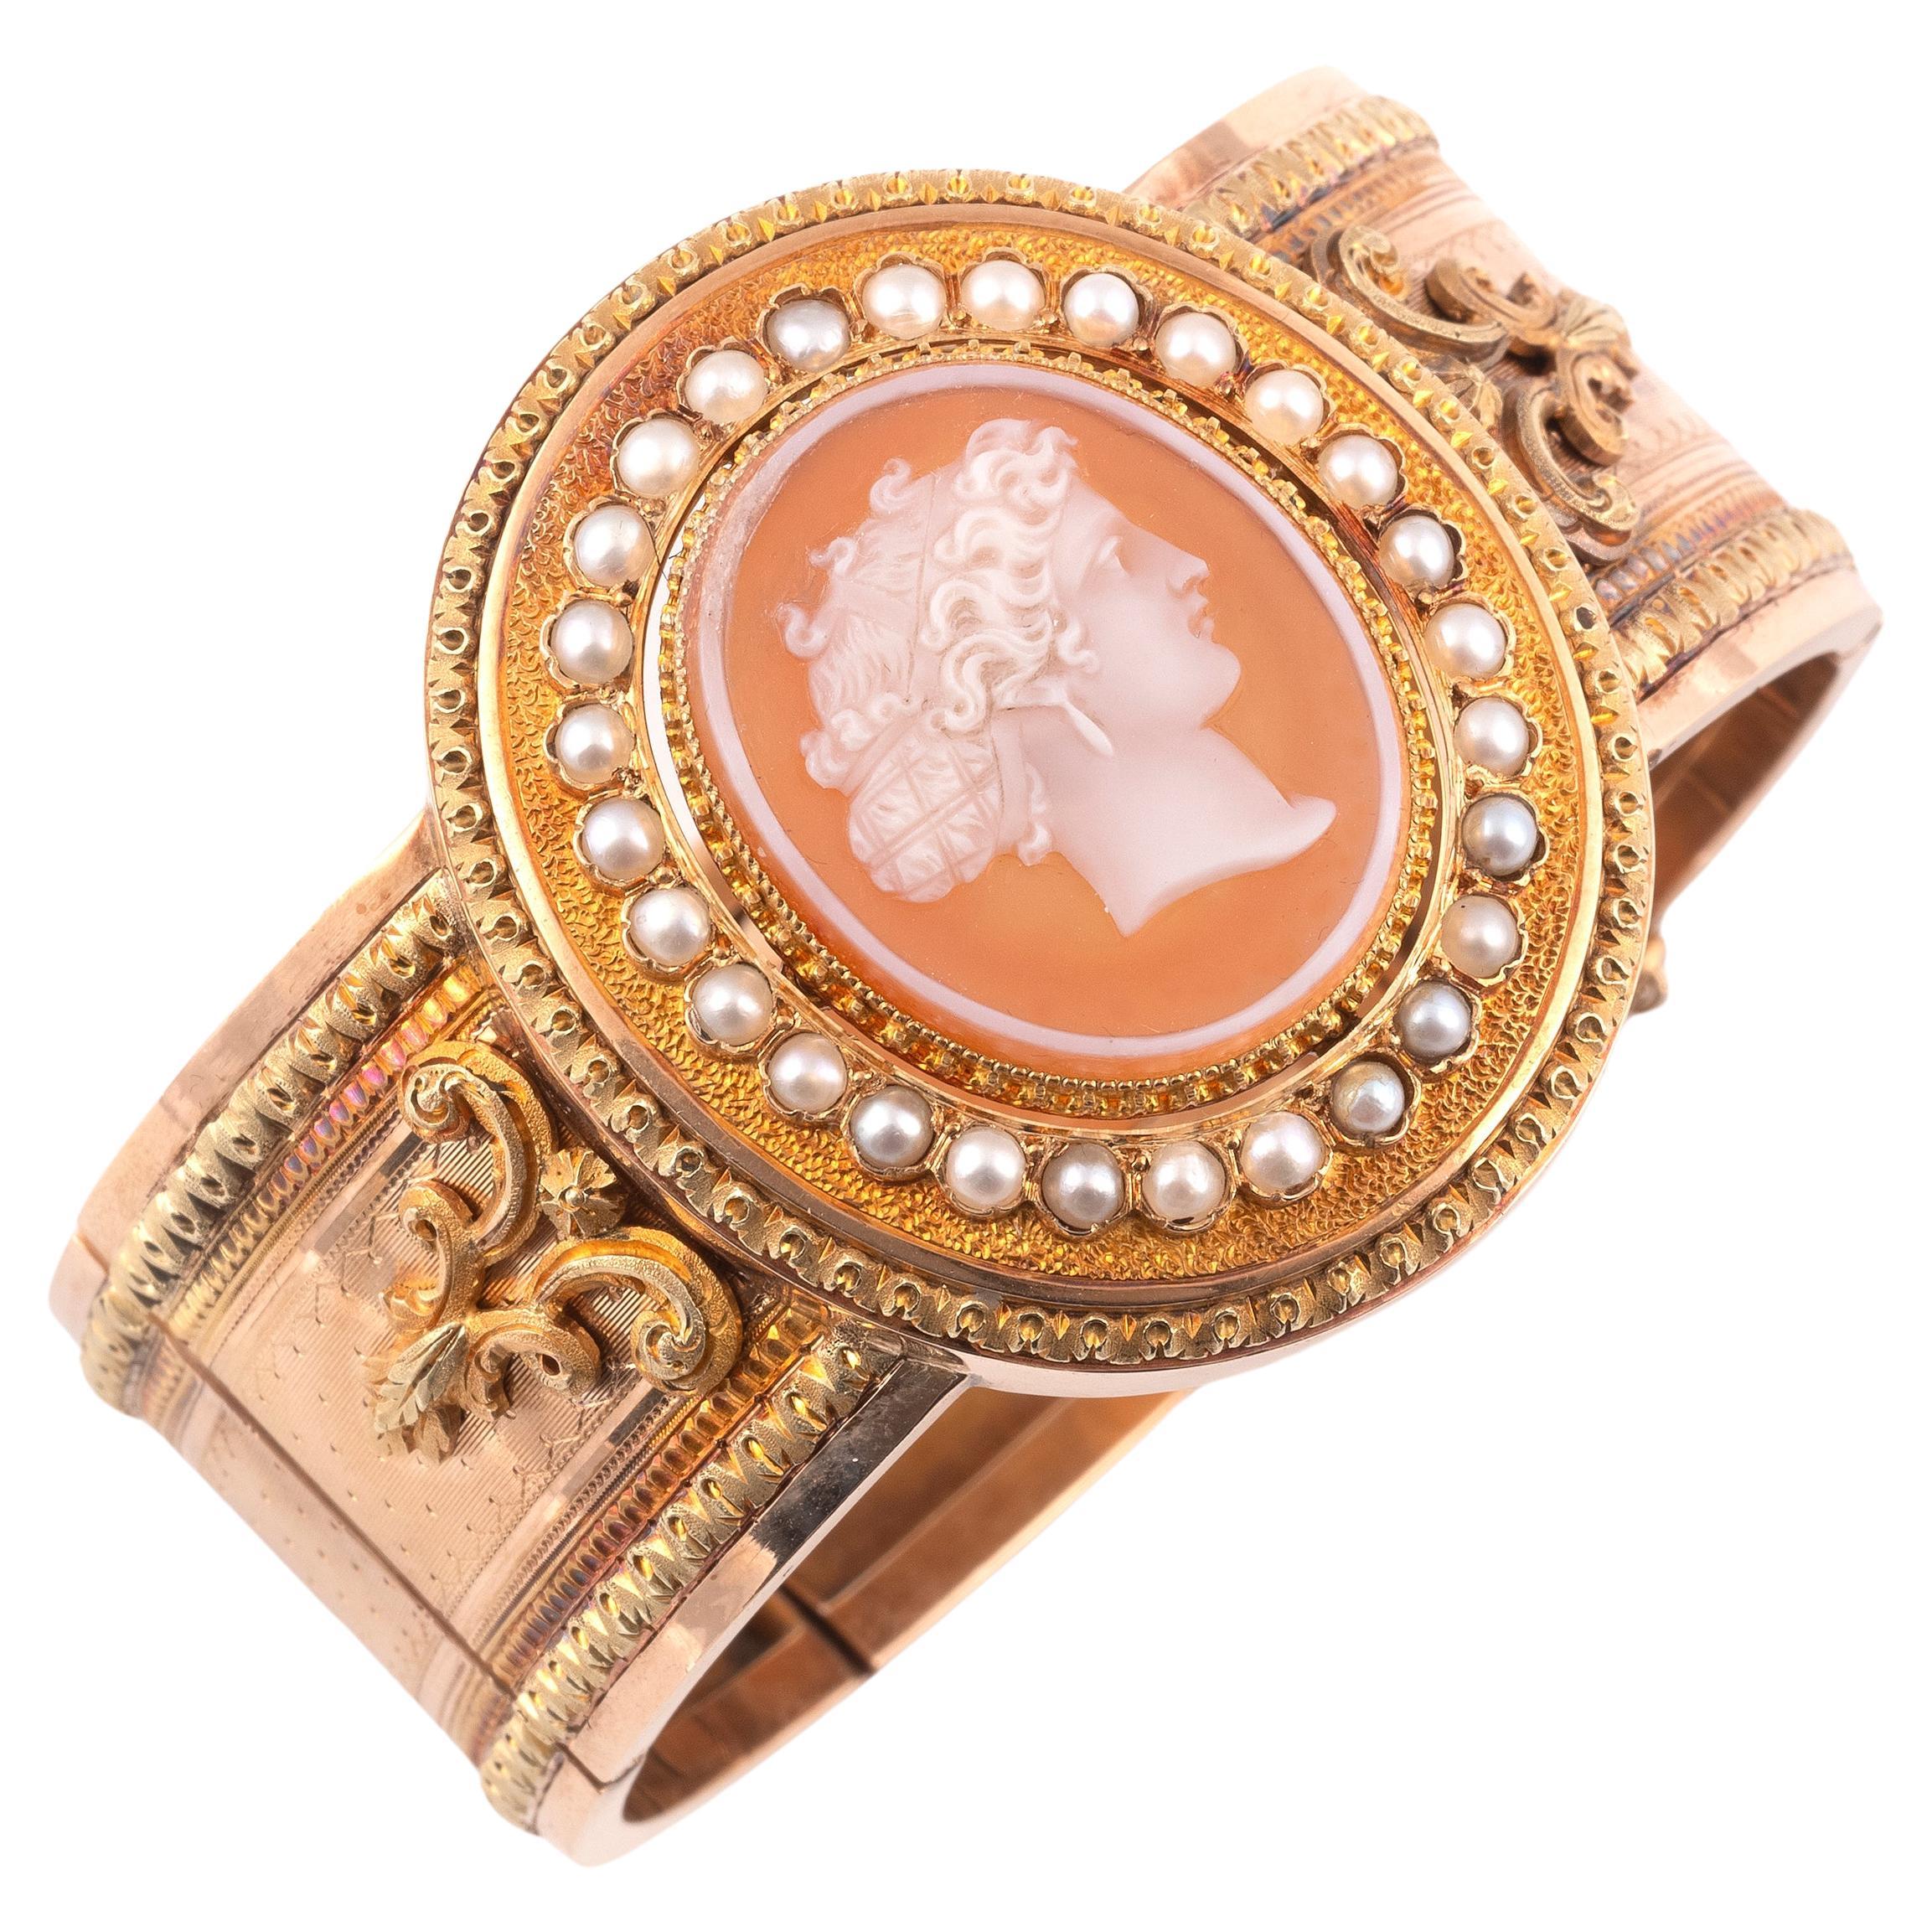 Archaeological-Style Gold And Agate Cameo Bangle 1850's